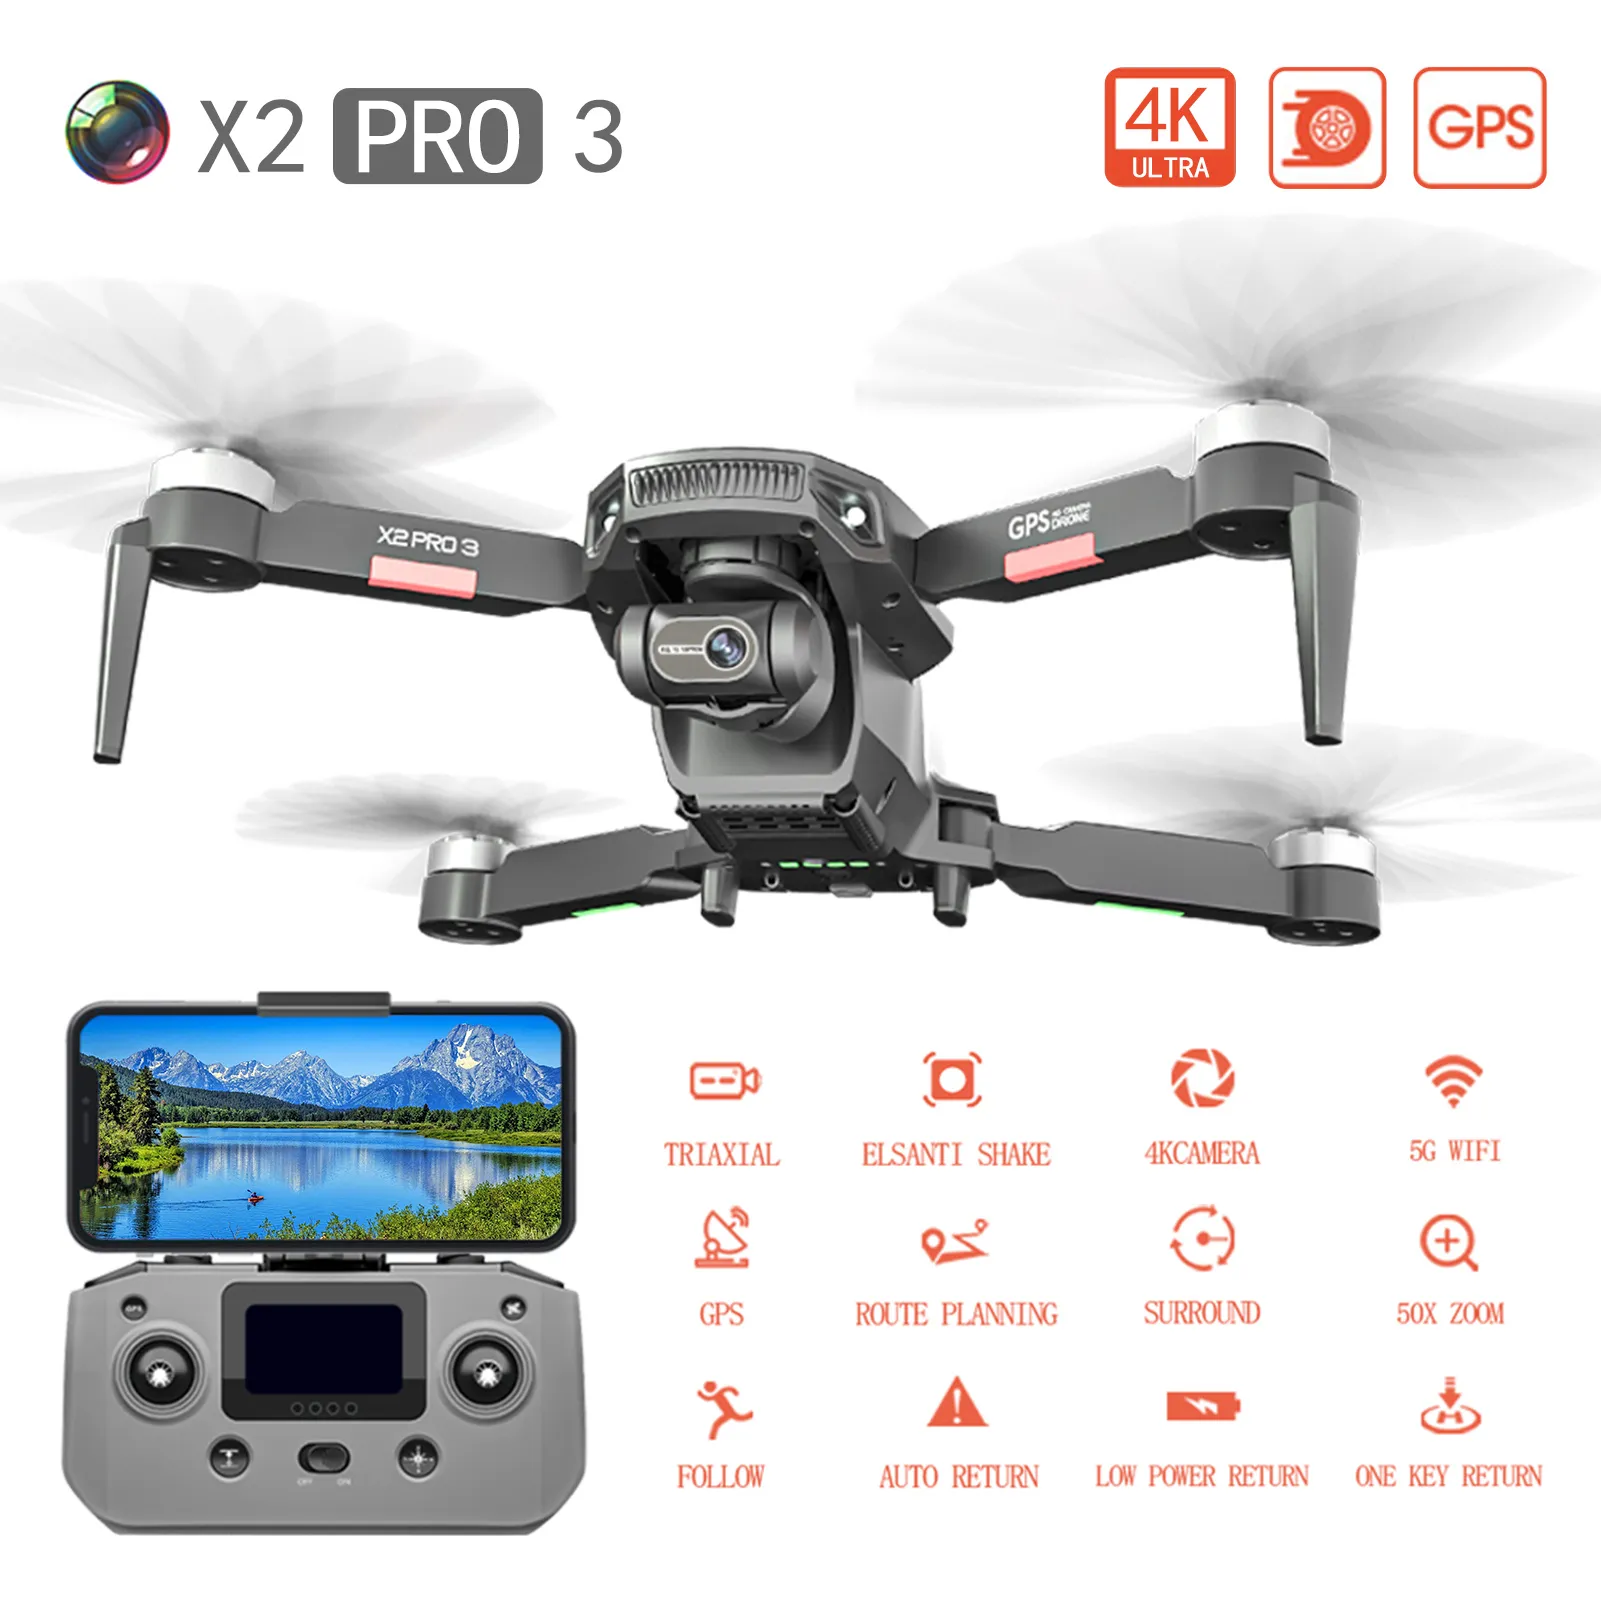 Professional RC Drone with 4K Camera, 3-axis Gimbal, Brushless Motor, 5G Wifi FPV, GPS, 1200m Control Distance - Ultimate Quadcopter Toy for Aerial Photography